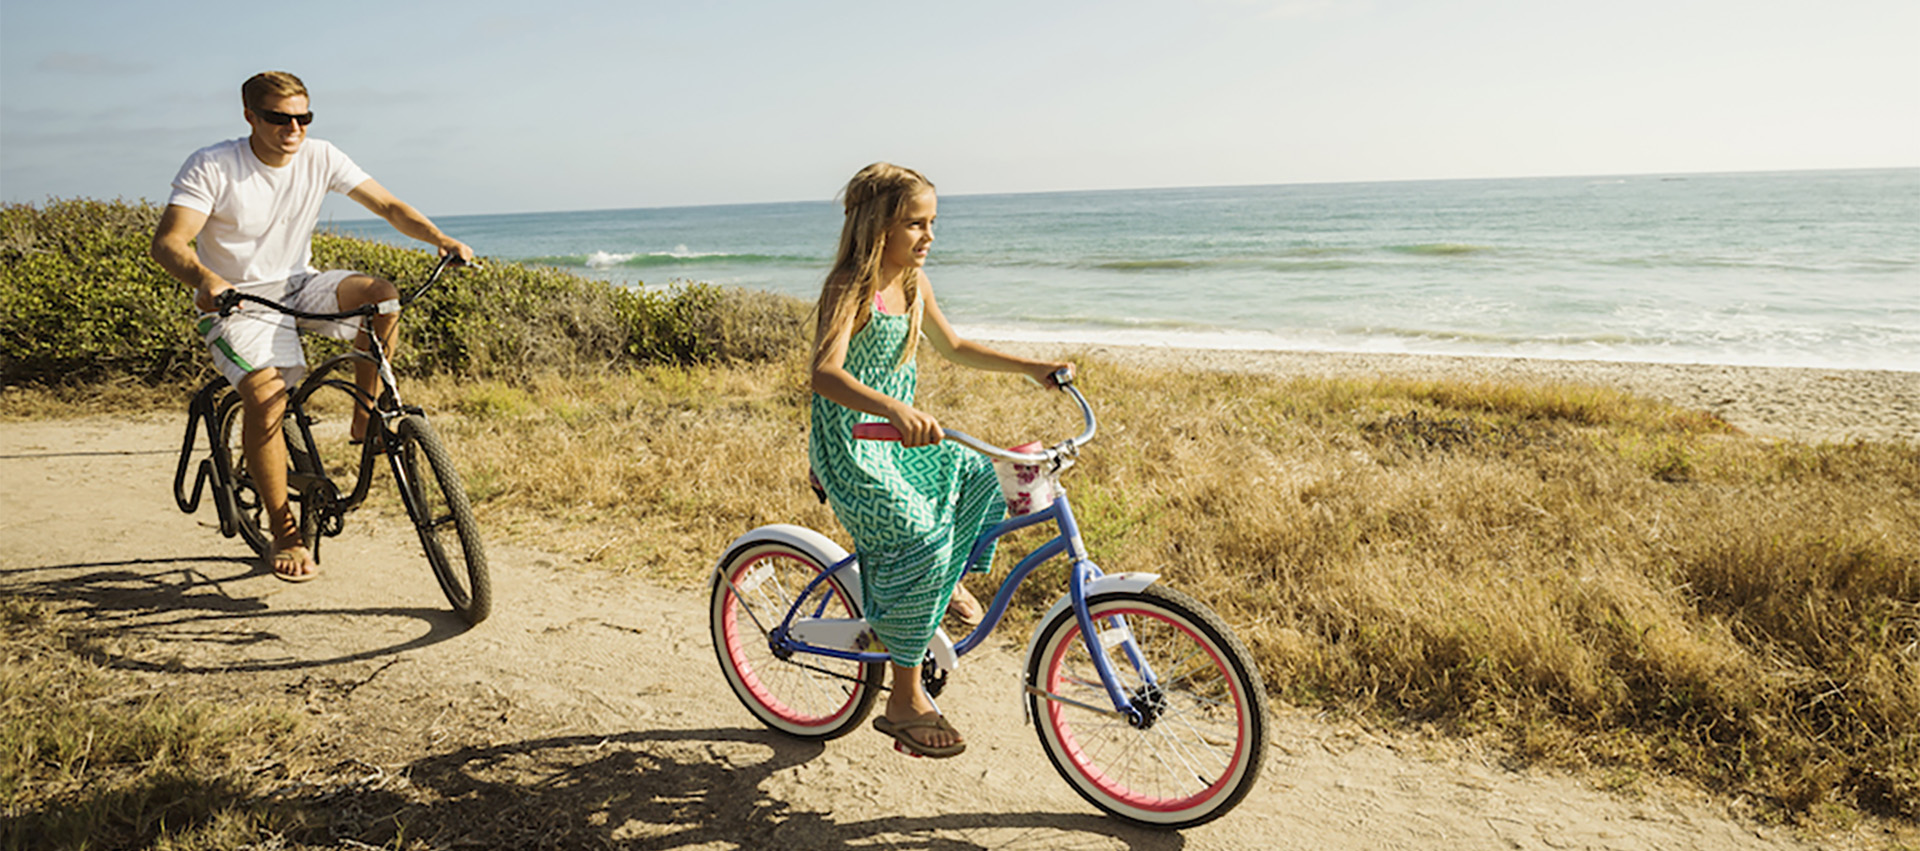 Image of a father and daughter biking along the beach